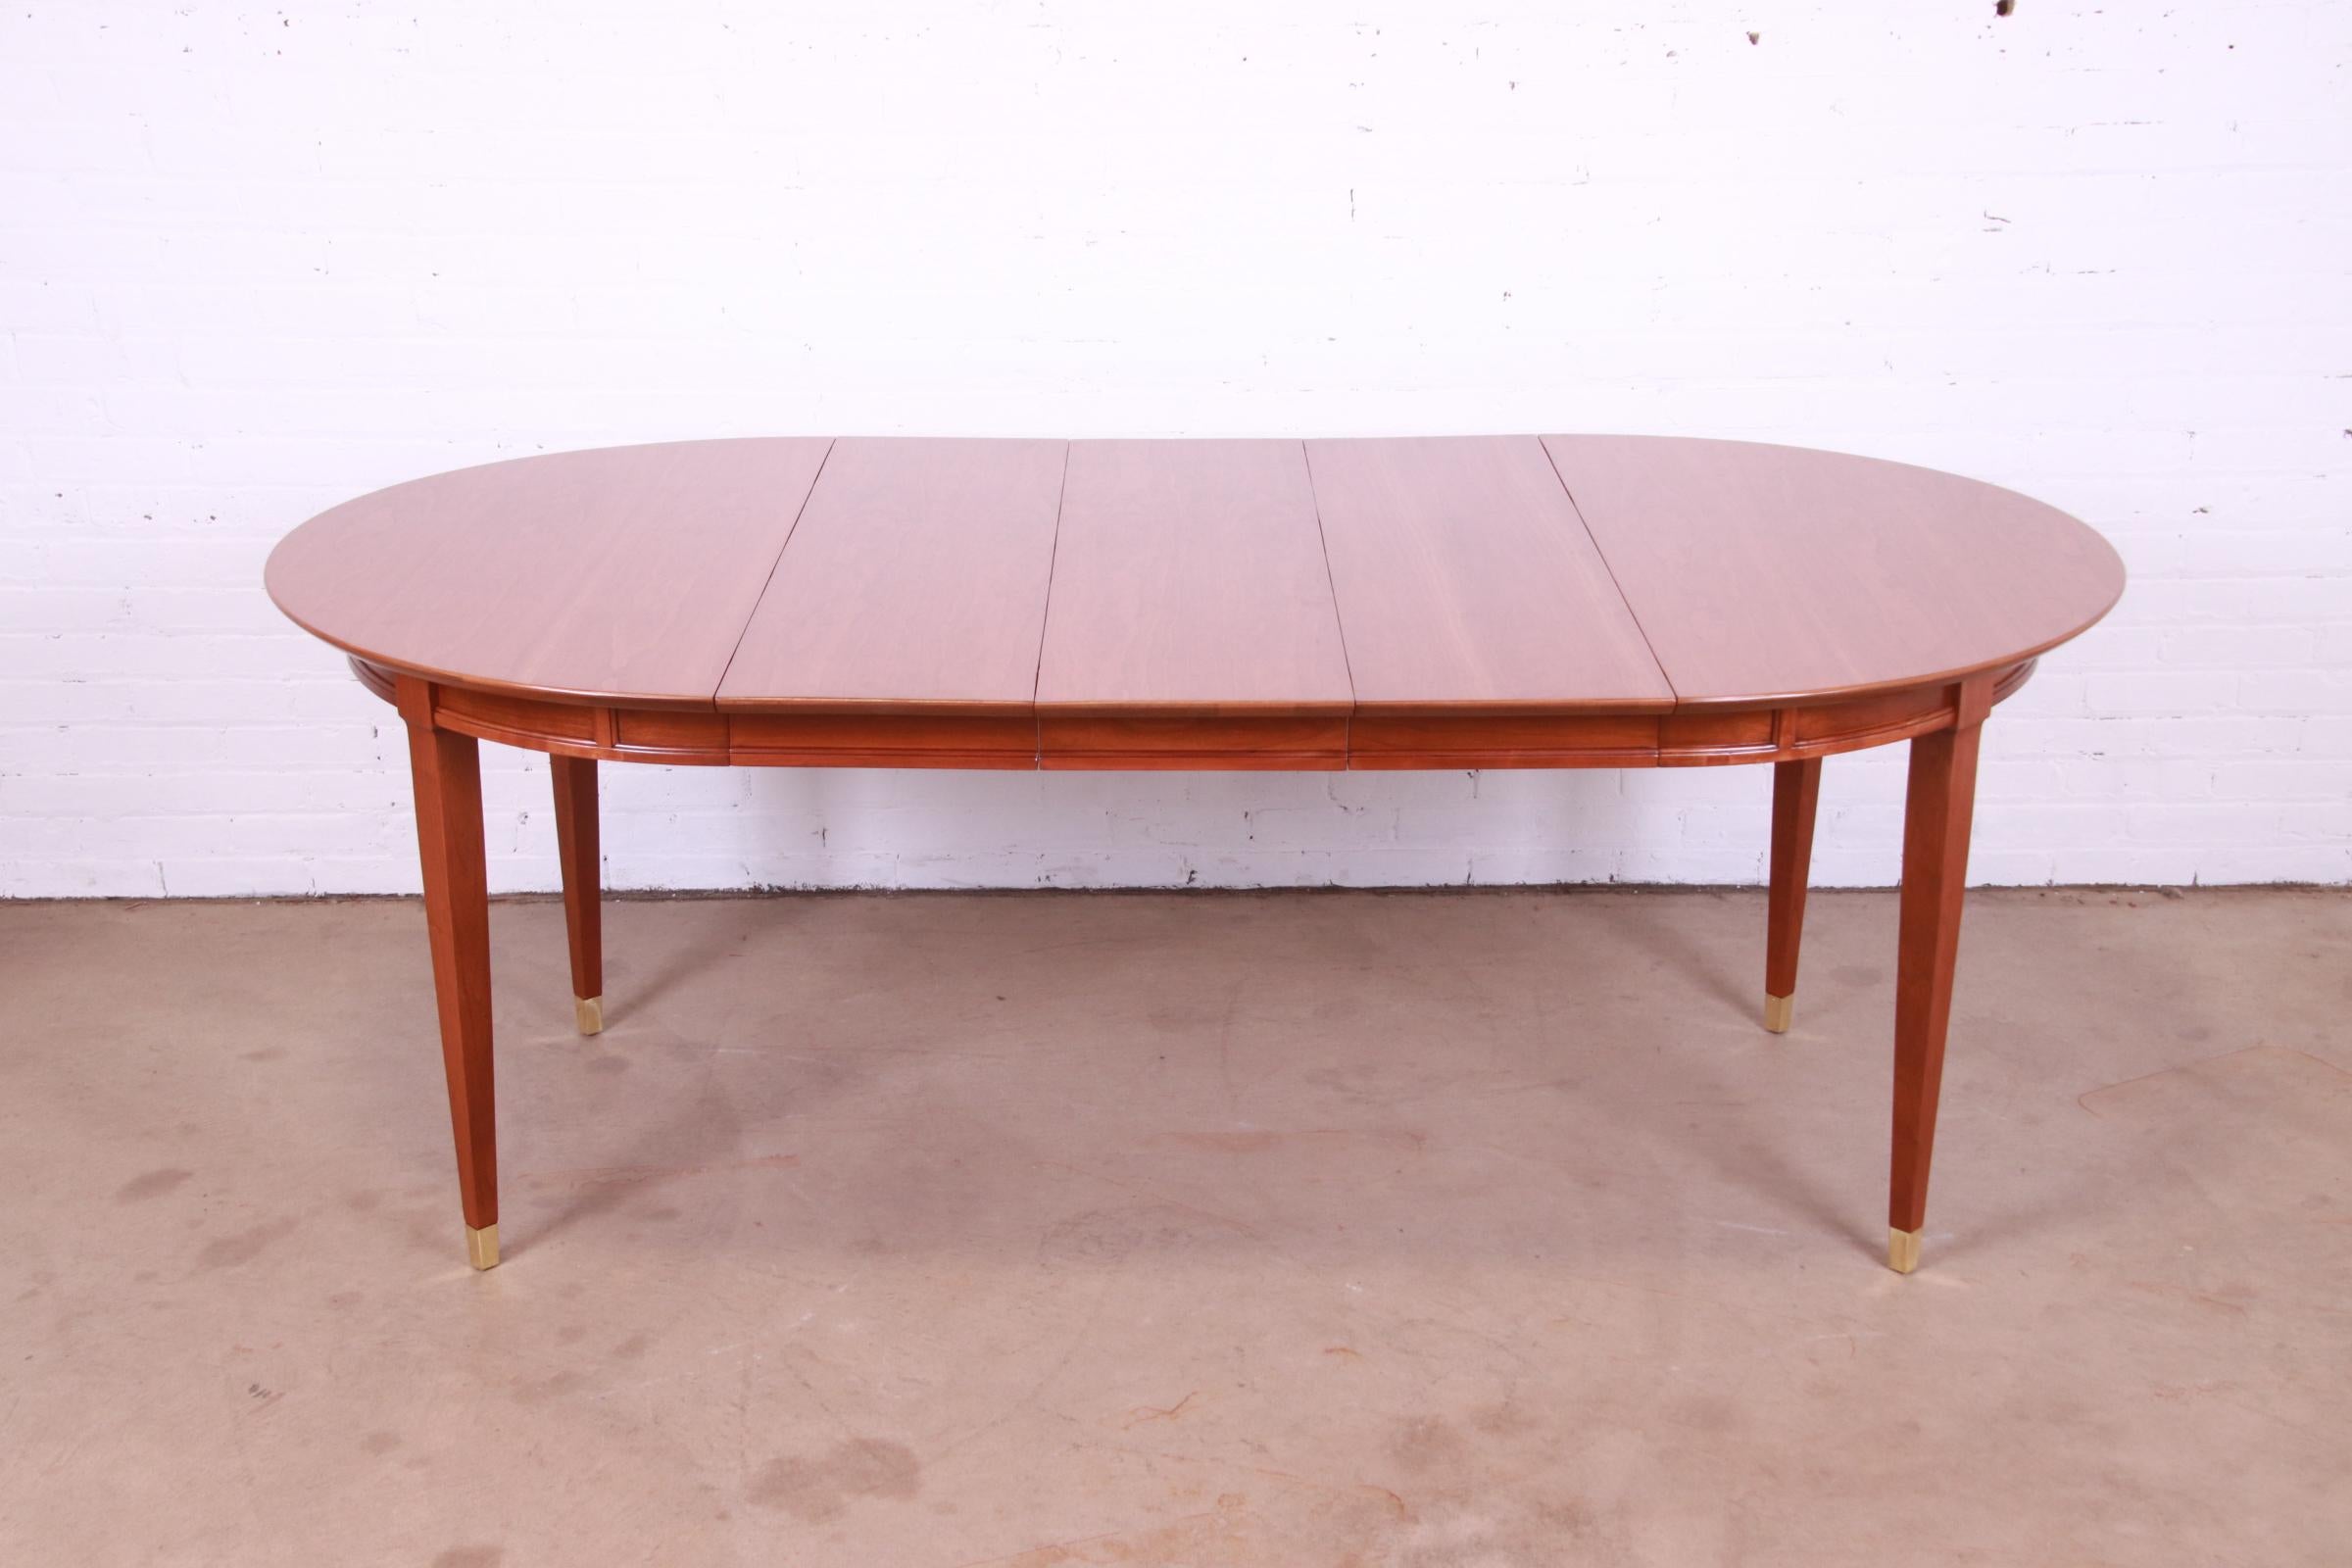 American Mid-Century French Regency Cherry Wood Dining Table Attributed to Tomlinson